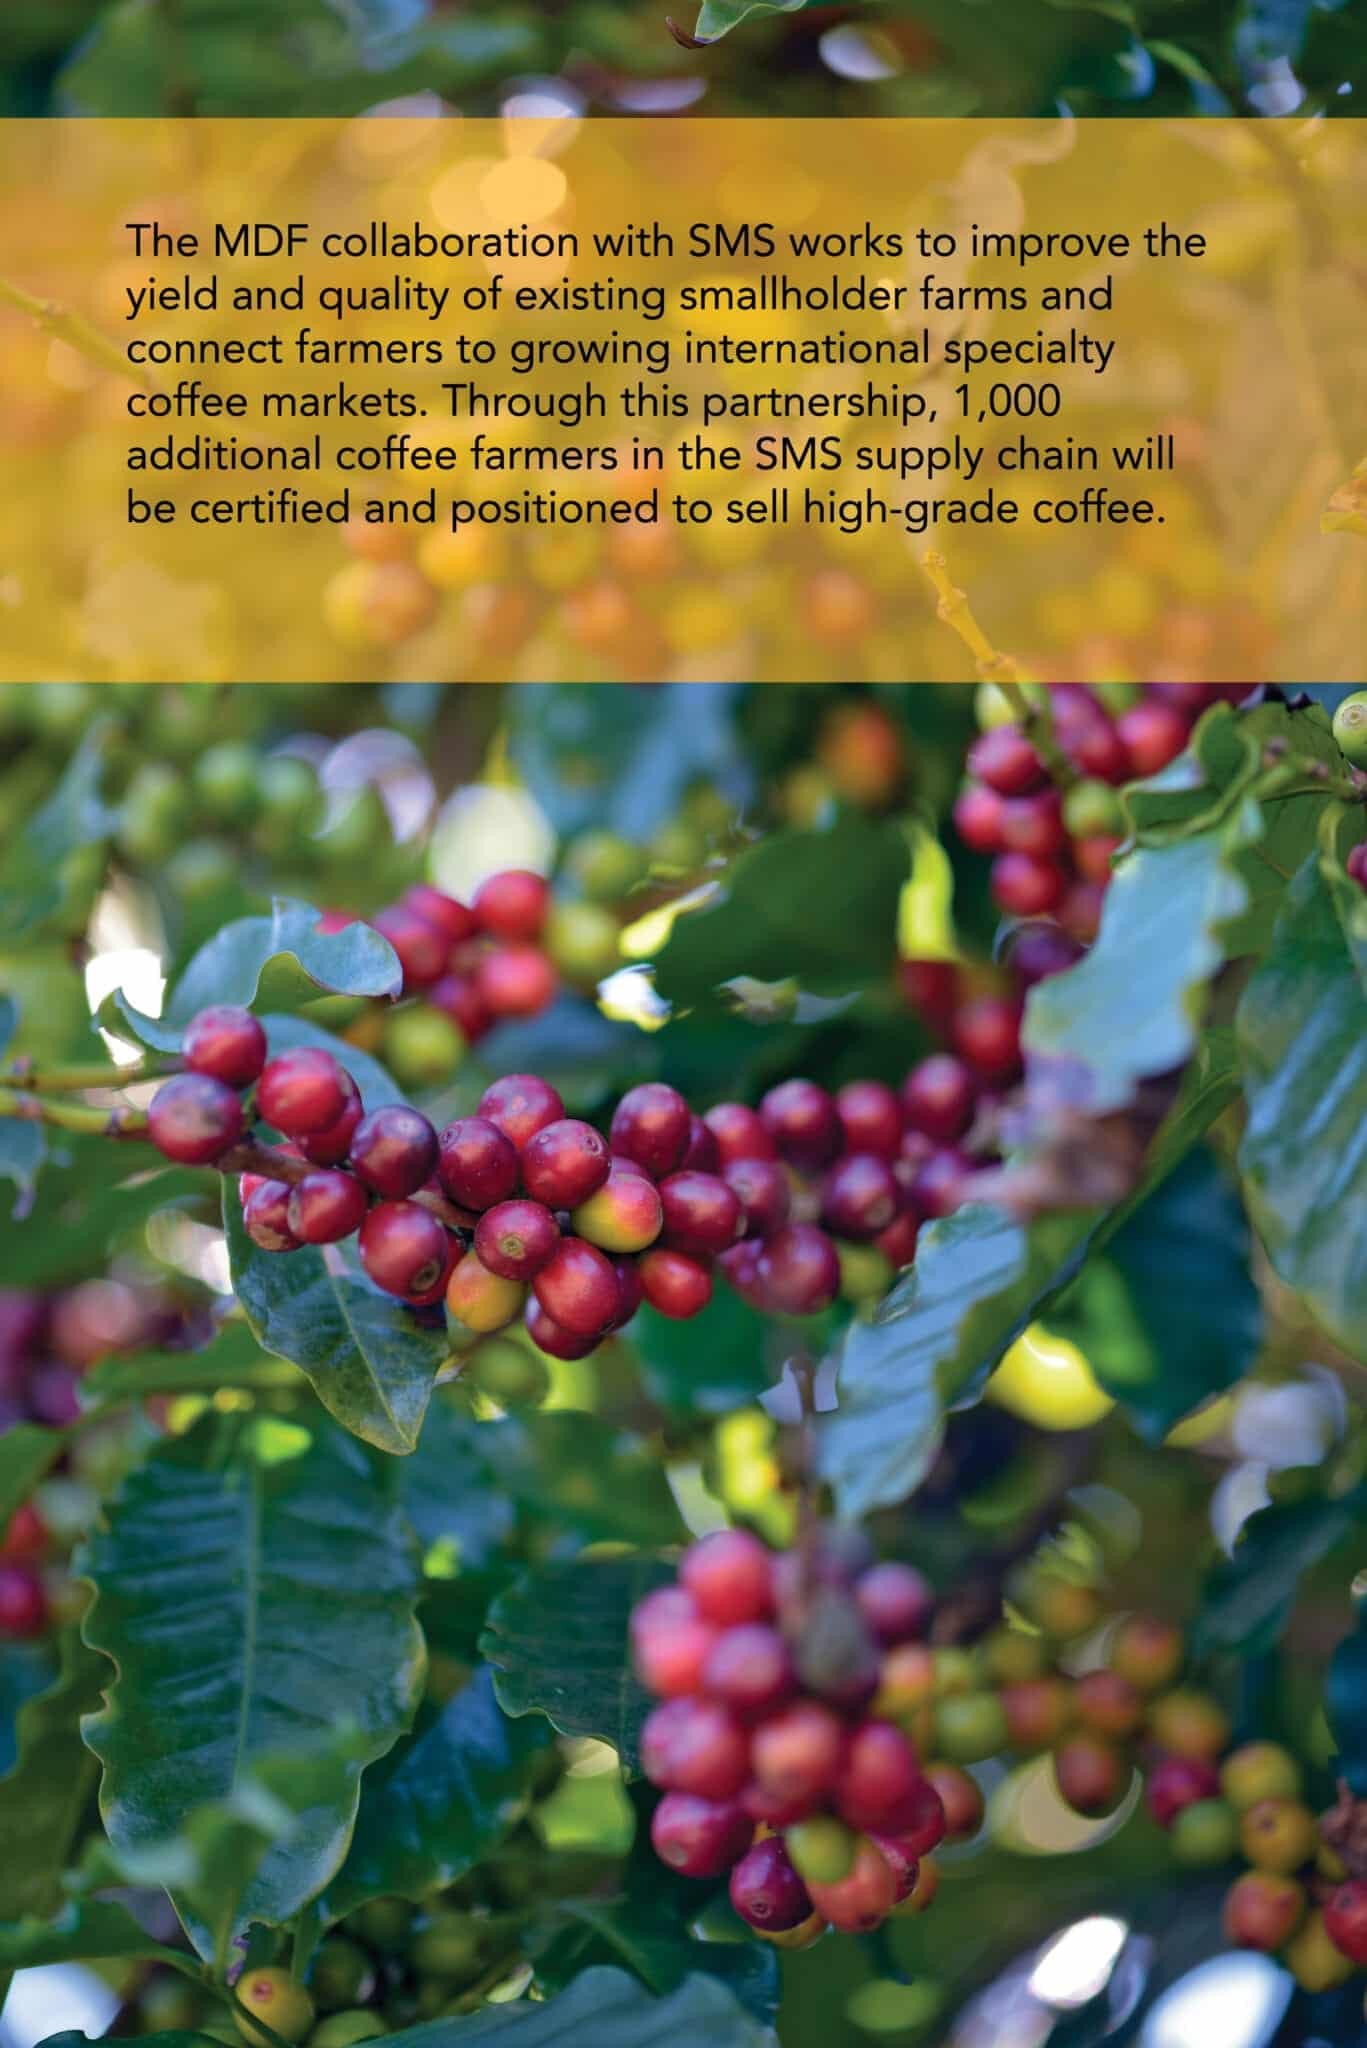 Through the partnership of MDF and SMS, the yield and quality of coffee cherries in Papua New Guinea had has improved.